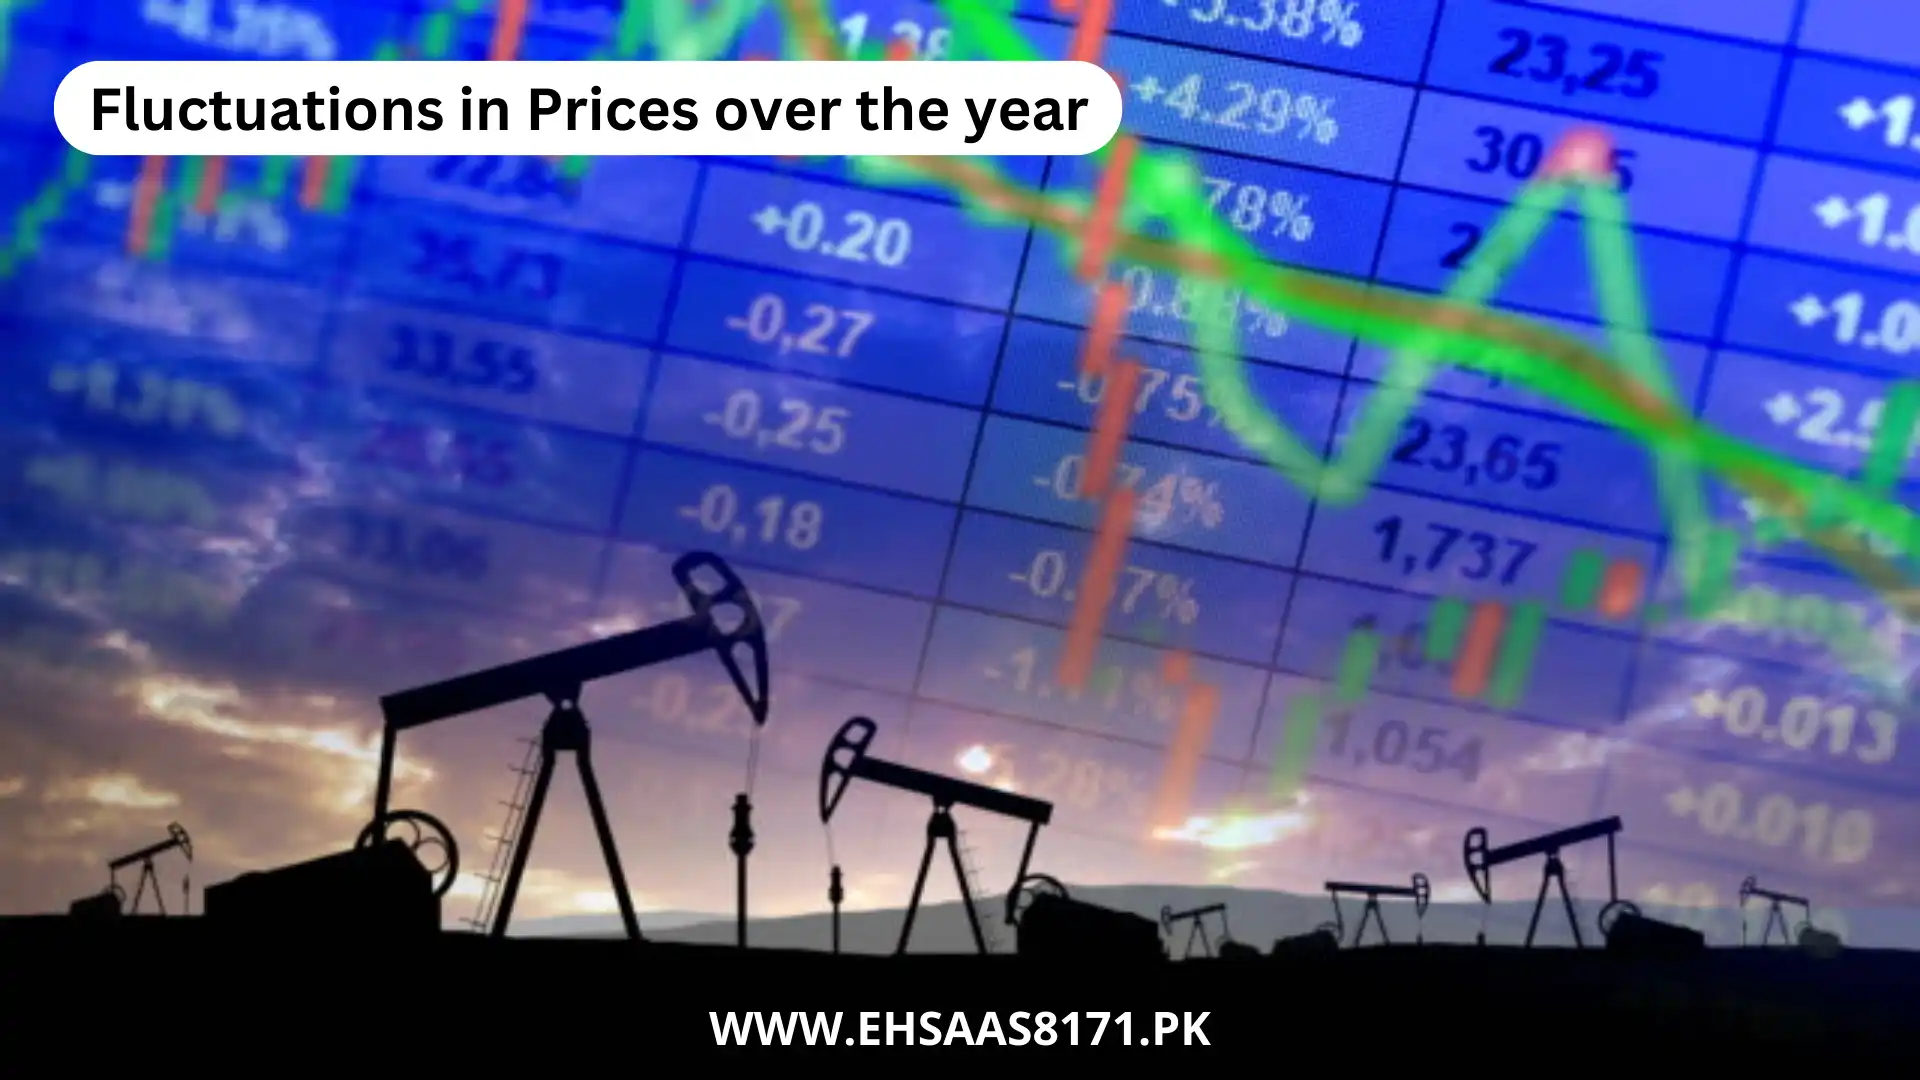 Fluctuations in Prices over the year